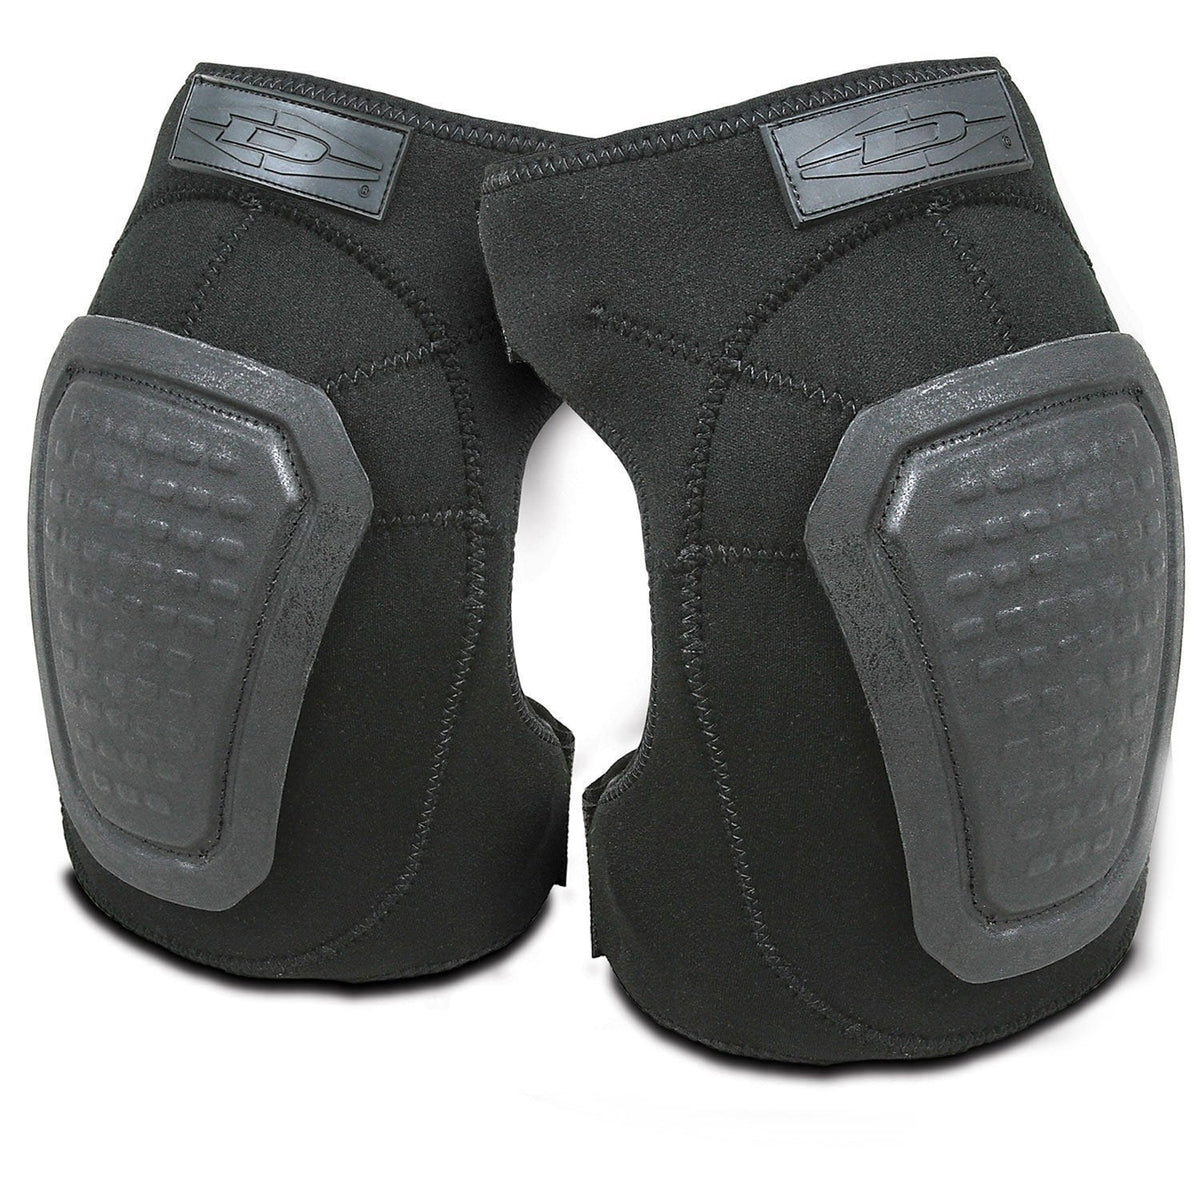 Damascus Imperial Neoprene Knee Pads Tactical Damascus Protective Gear Black Tactical Gear Supplier Tactical Distributors Australia